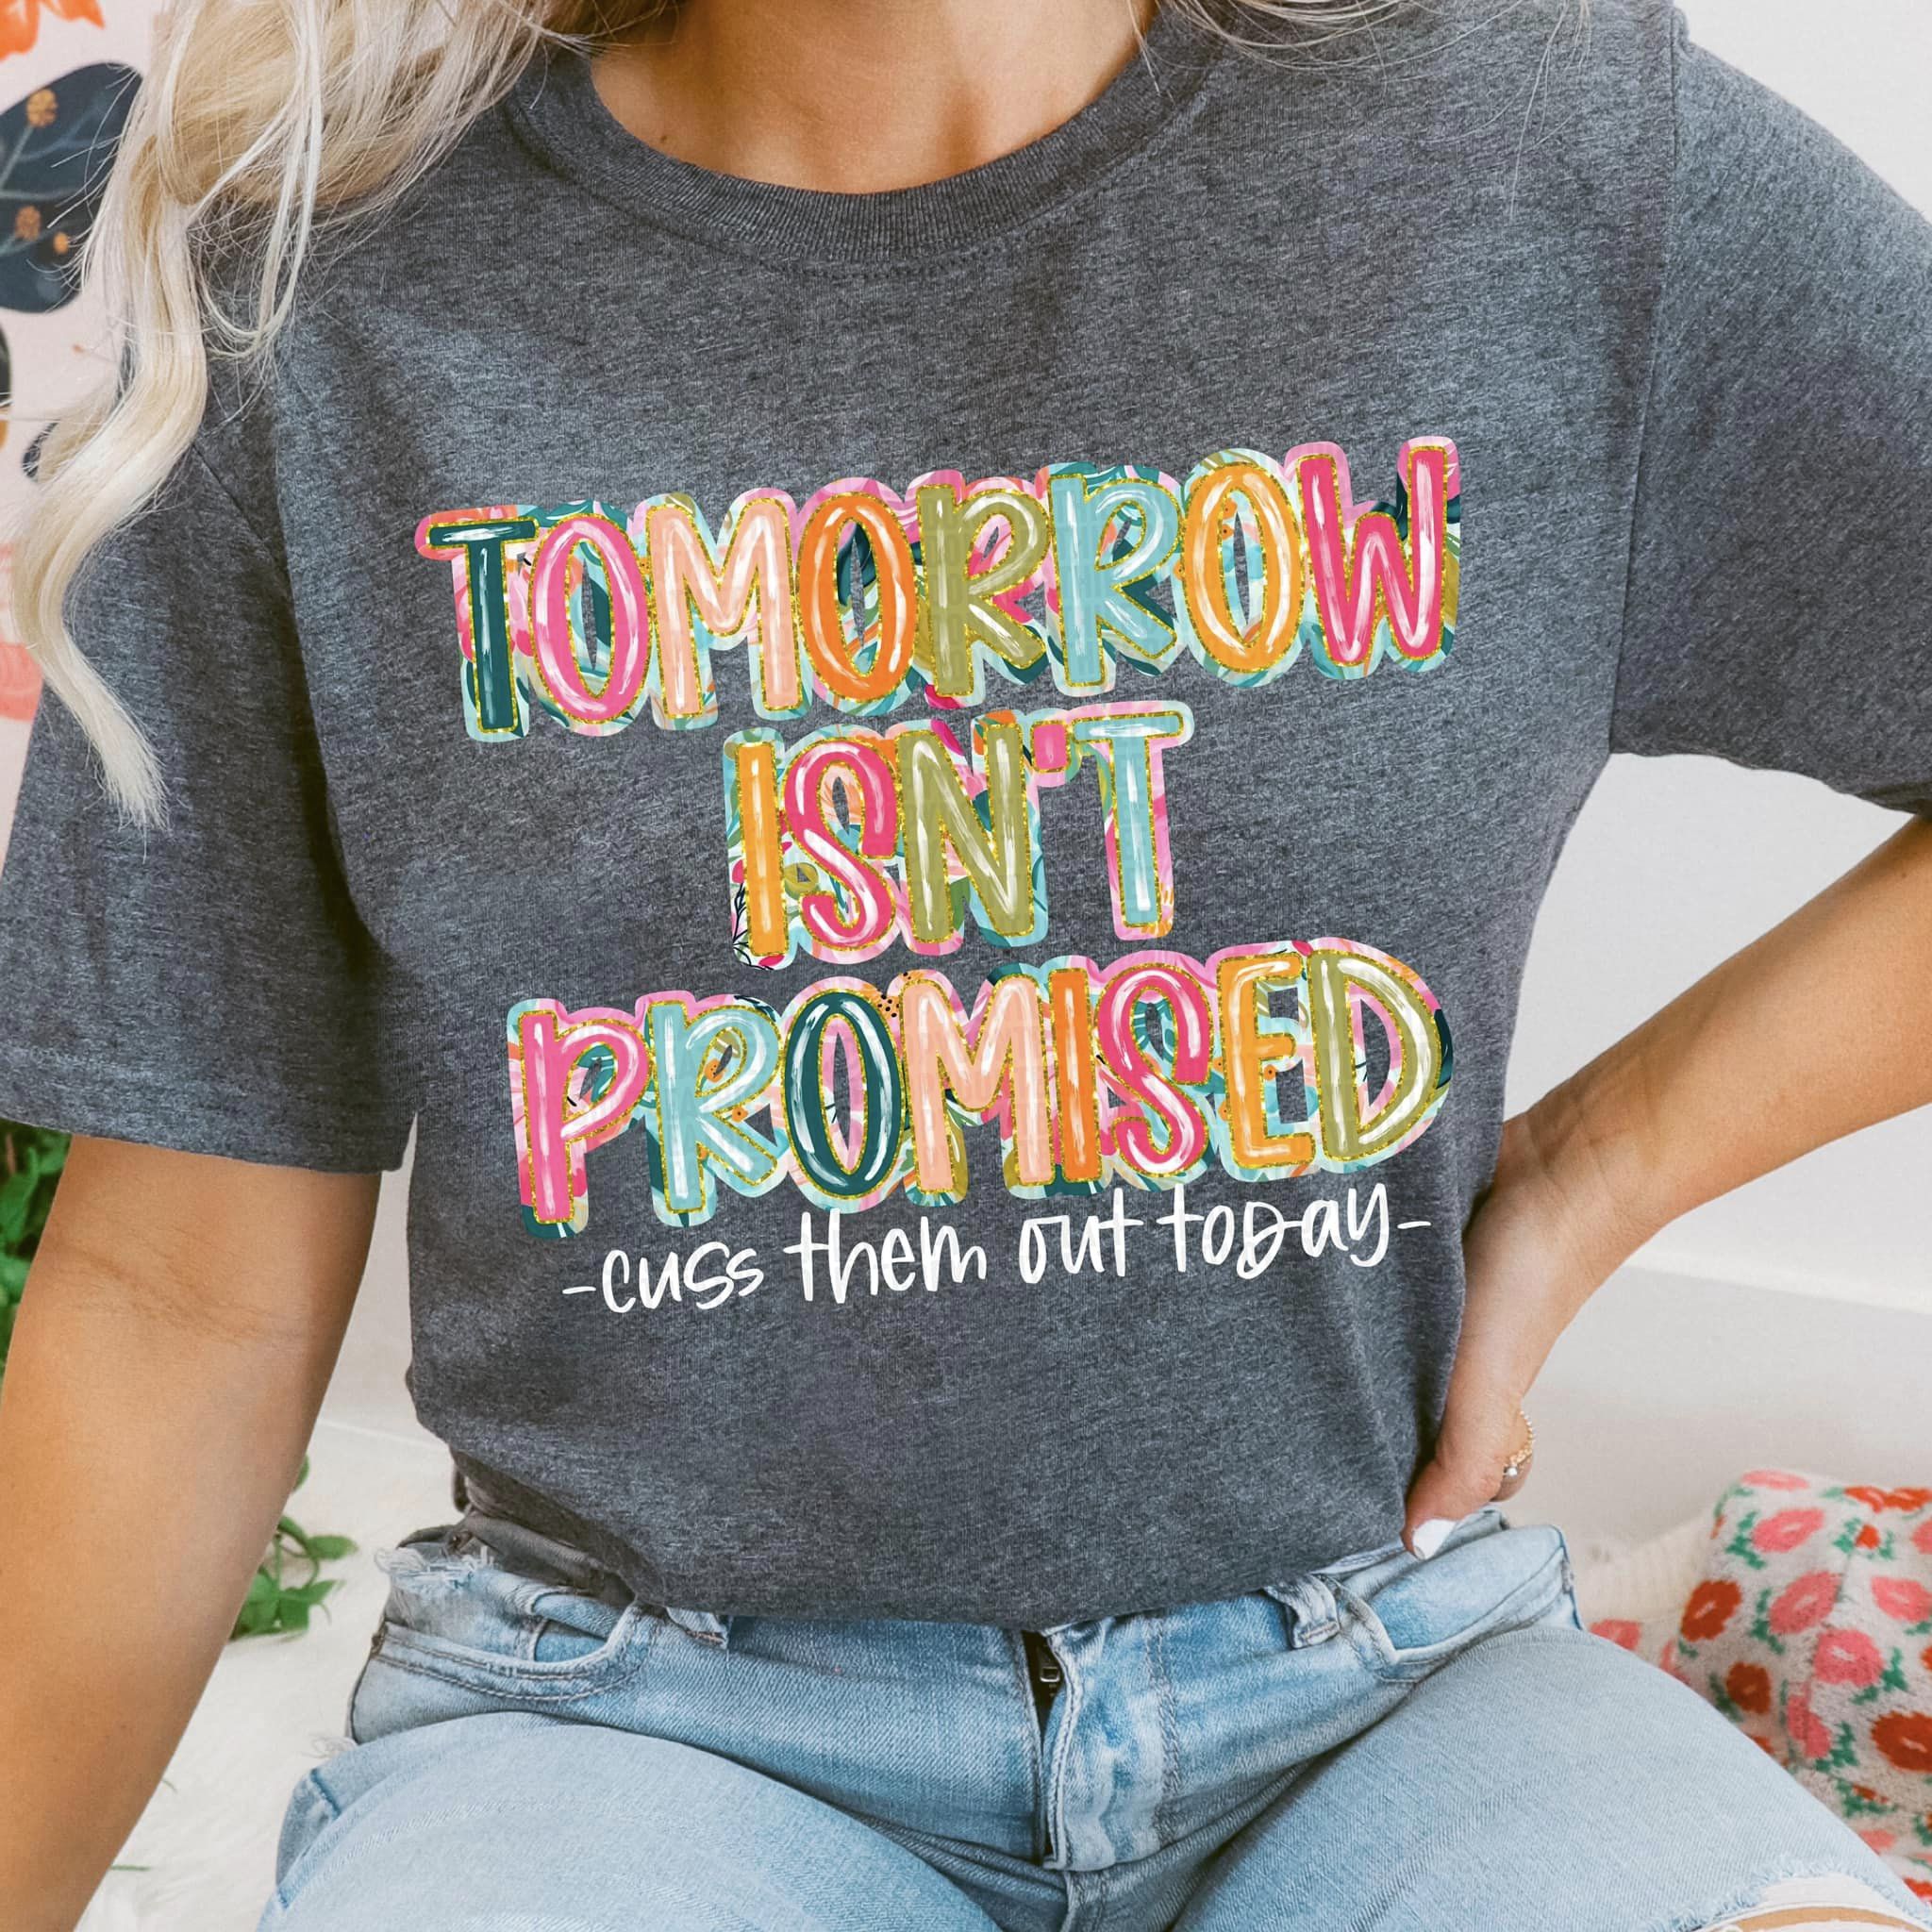 Tomorrow Isn't Promised Cuss Them Out Today - White Writing - Tee